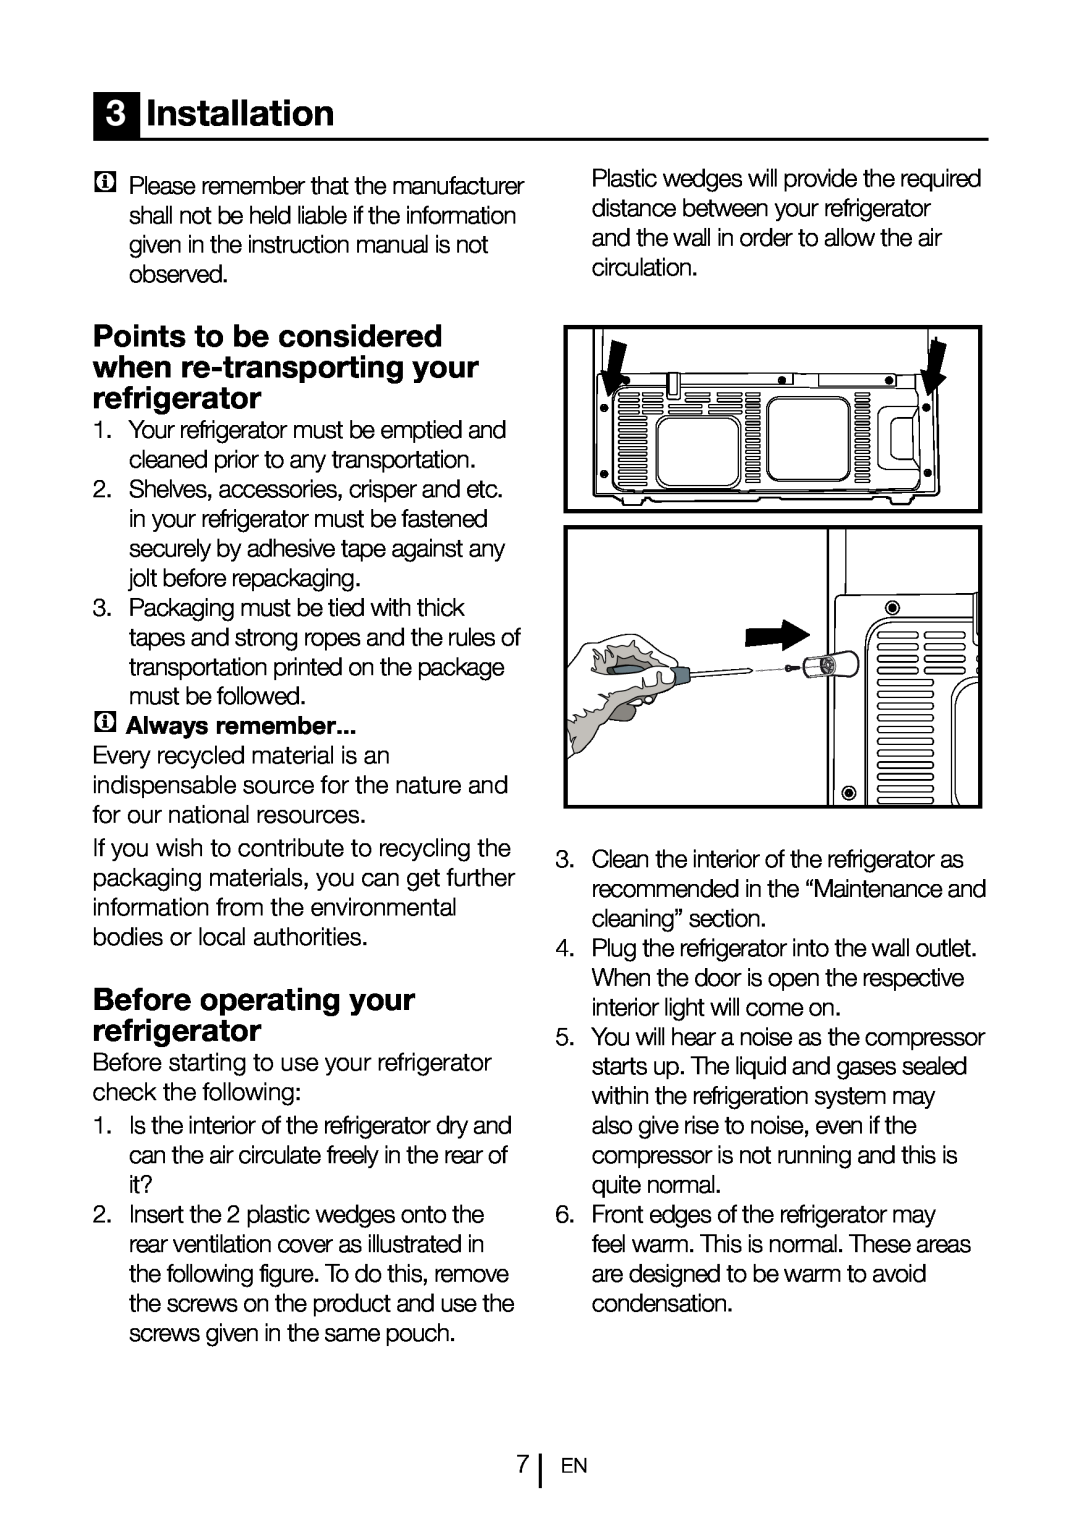 Blomberg KQD 1360X instruction manual 3Installation, Before operating your refrigerator, C Always remember 